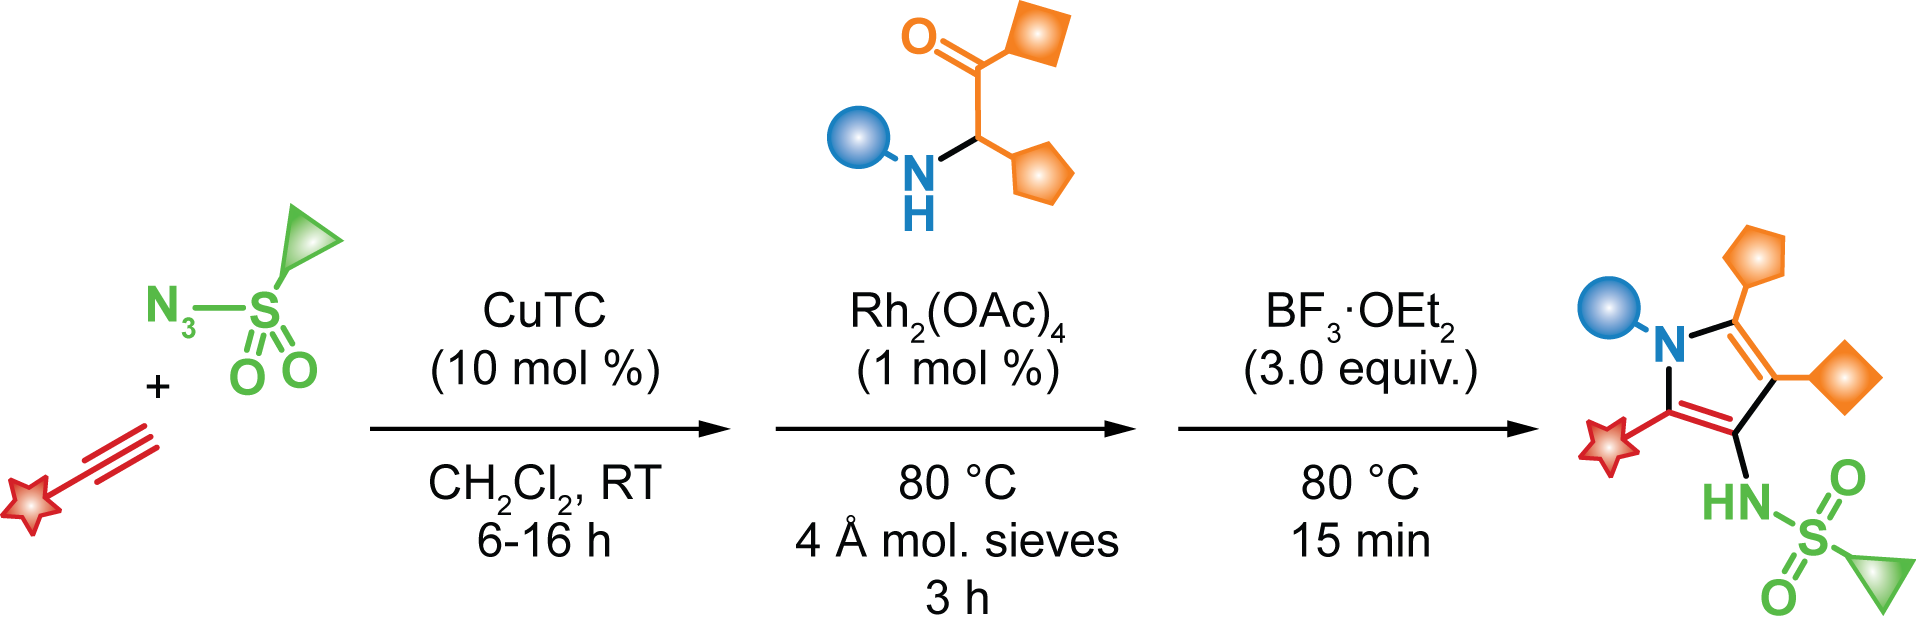 Abstract image for Modular Synthesis of Highly Substituted 3-Azapyrroles by Rh(II)-Catalyzed N–H Bond Insertion and Cyclodehydration